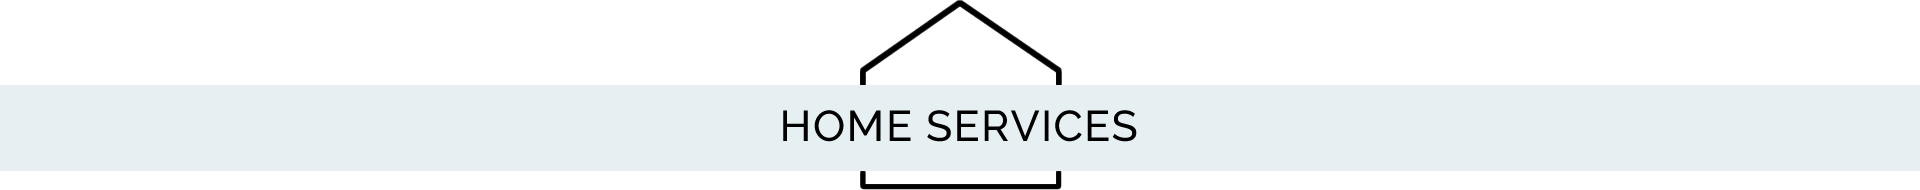 Professional Home Organizing & Redecorating Services North Georgia